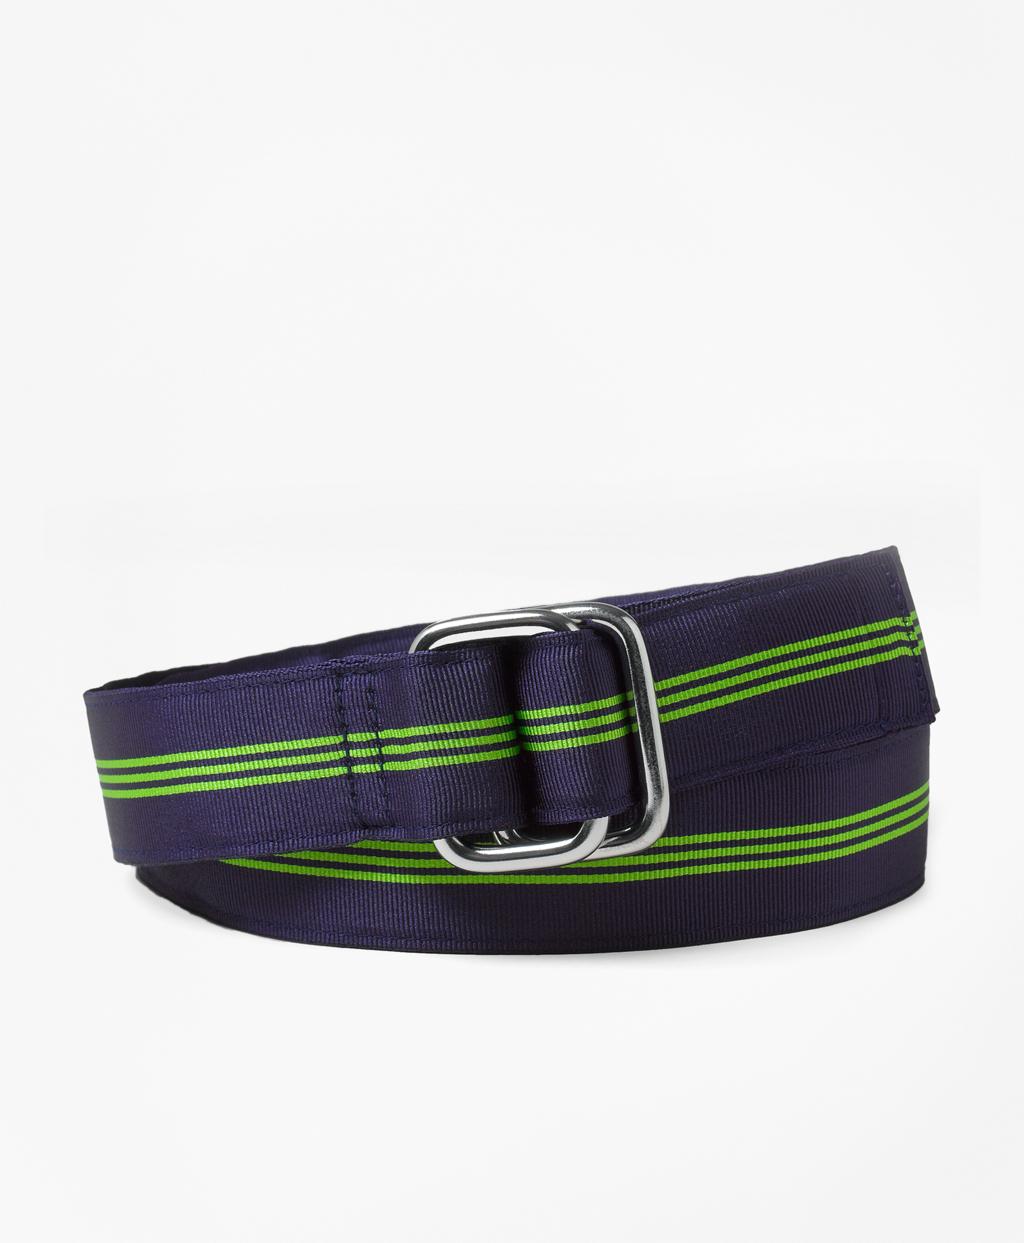 Lyst - Brooks Brothers Ribbon Belt in Blue for Men - Save 20. ...